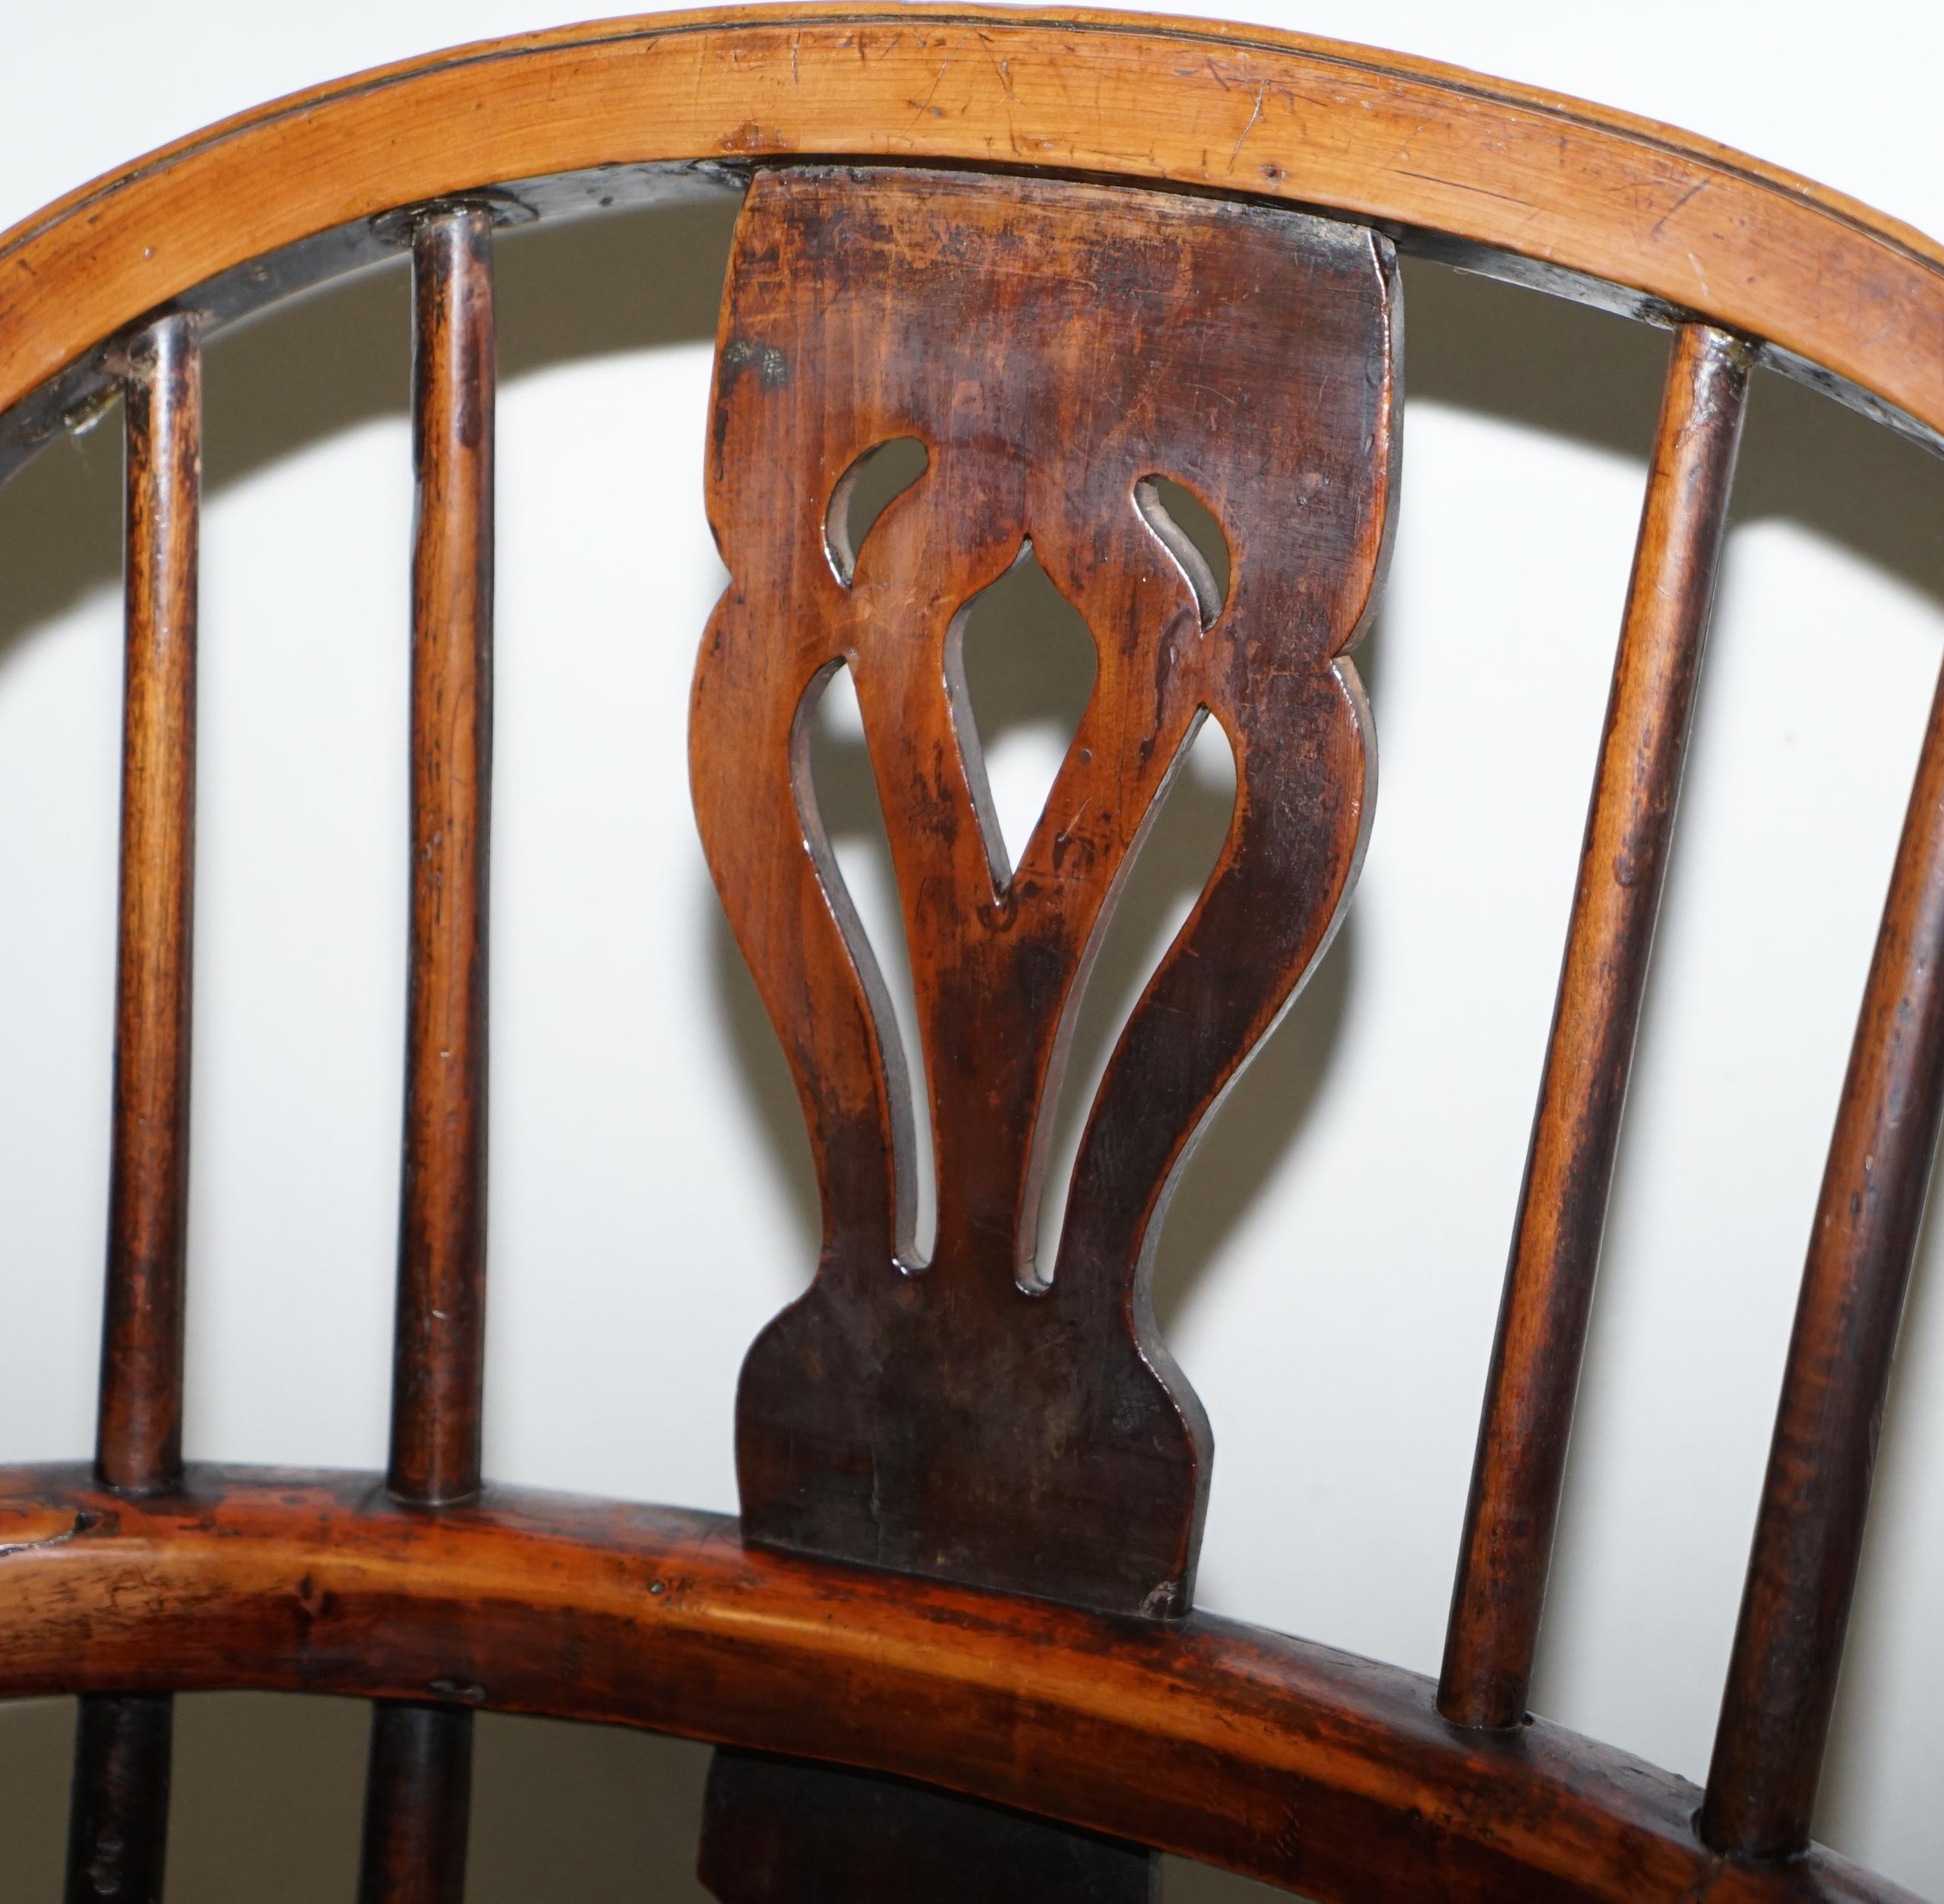 1 of 6 Solid Elm Windsor Armchairs circa 1860 English Countryhouse Furniture For Sale 1